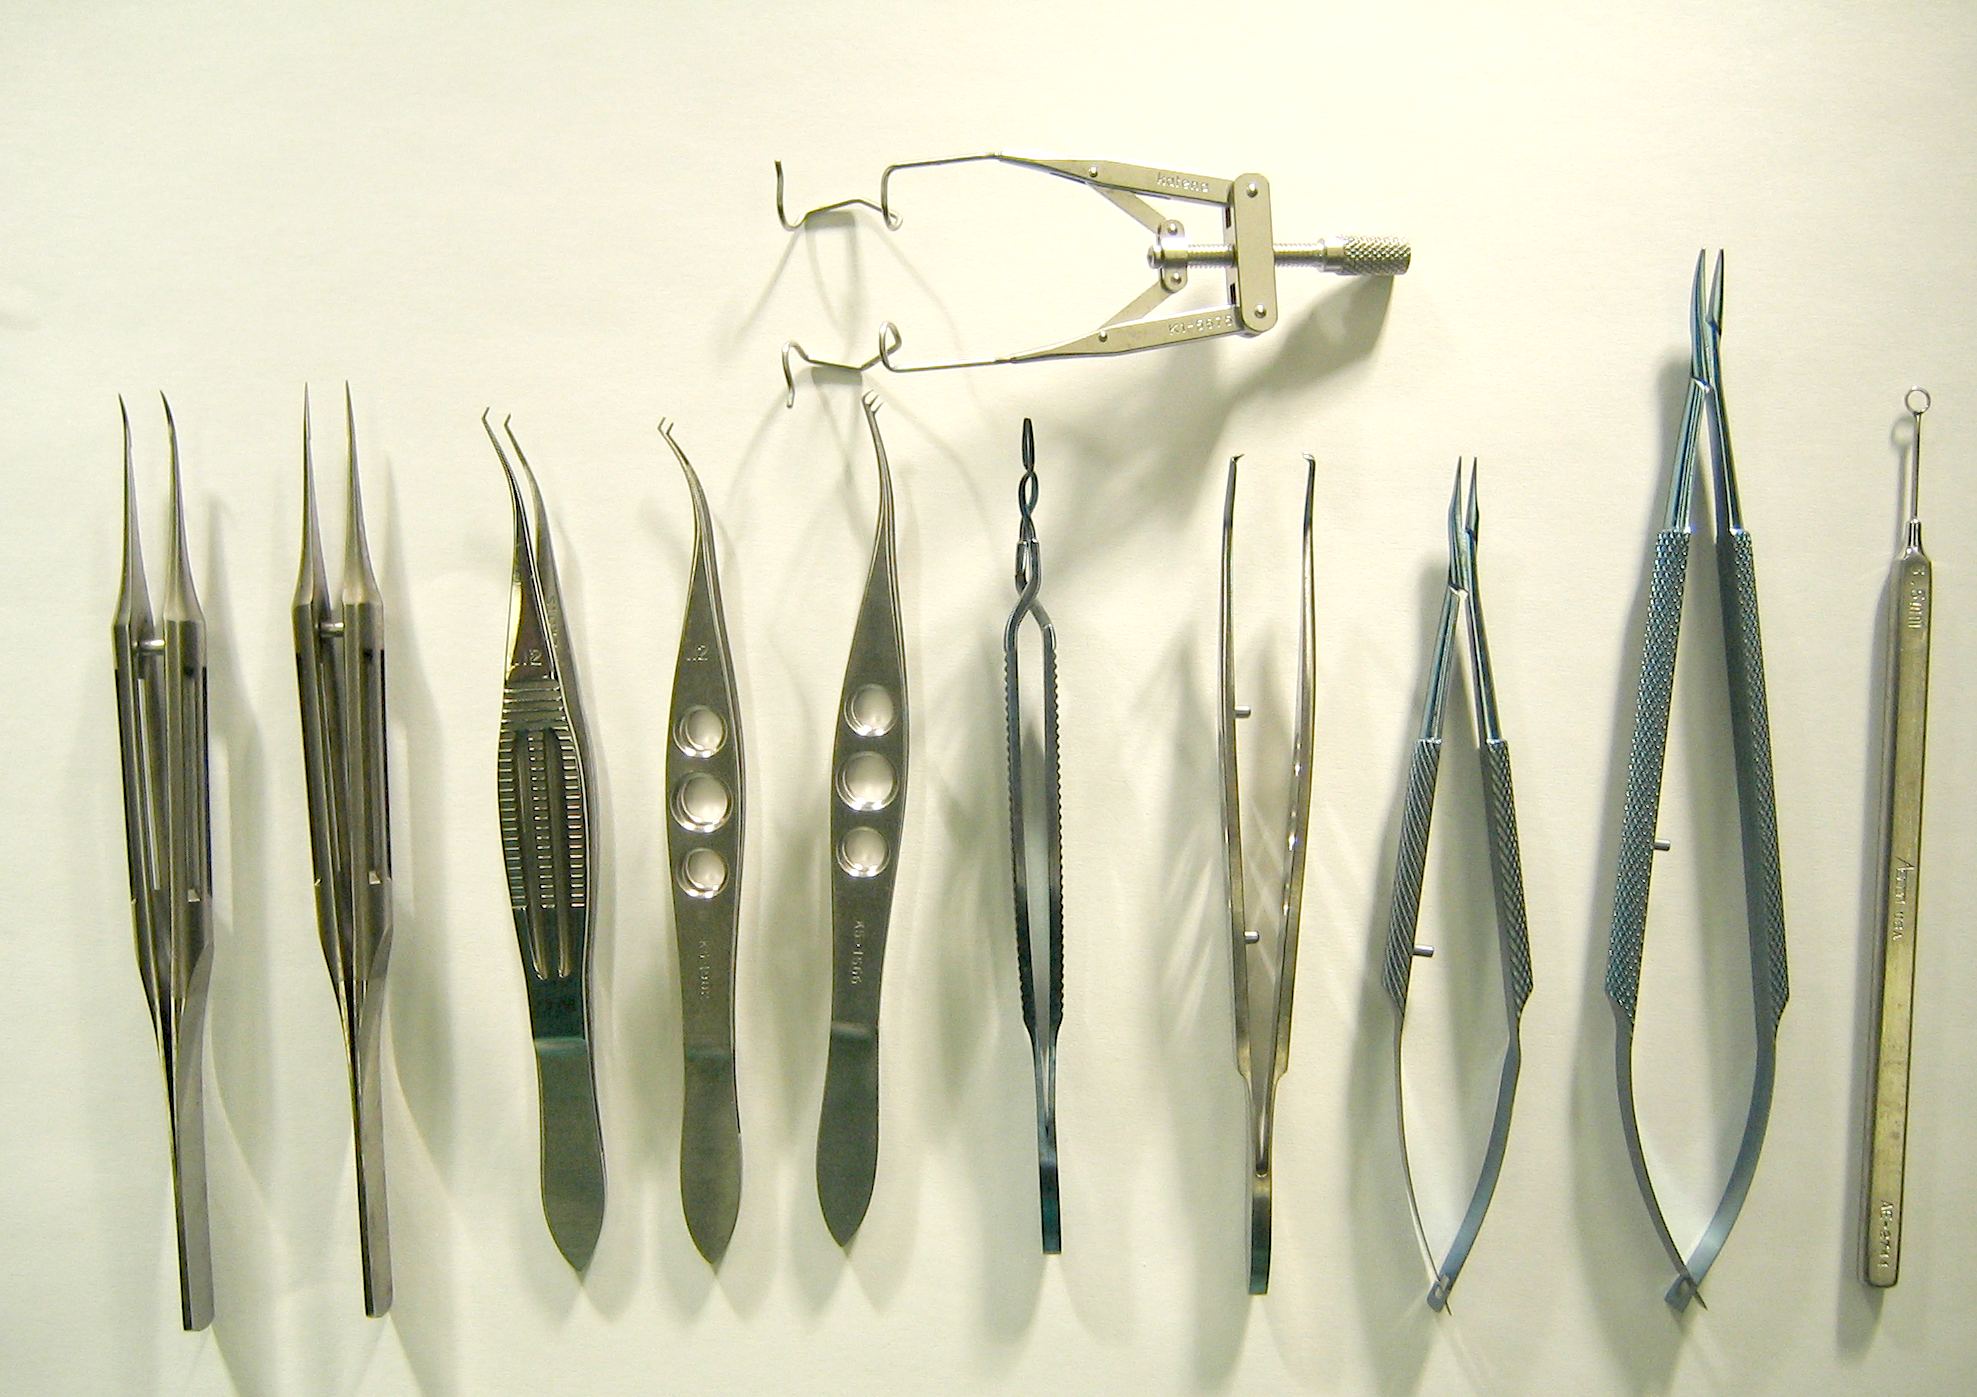 Tray of recomended surgical kit